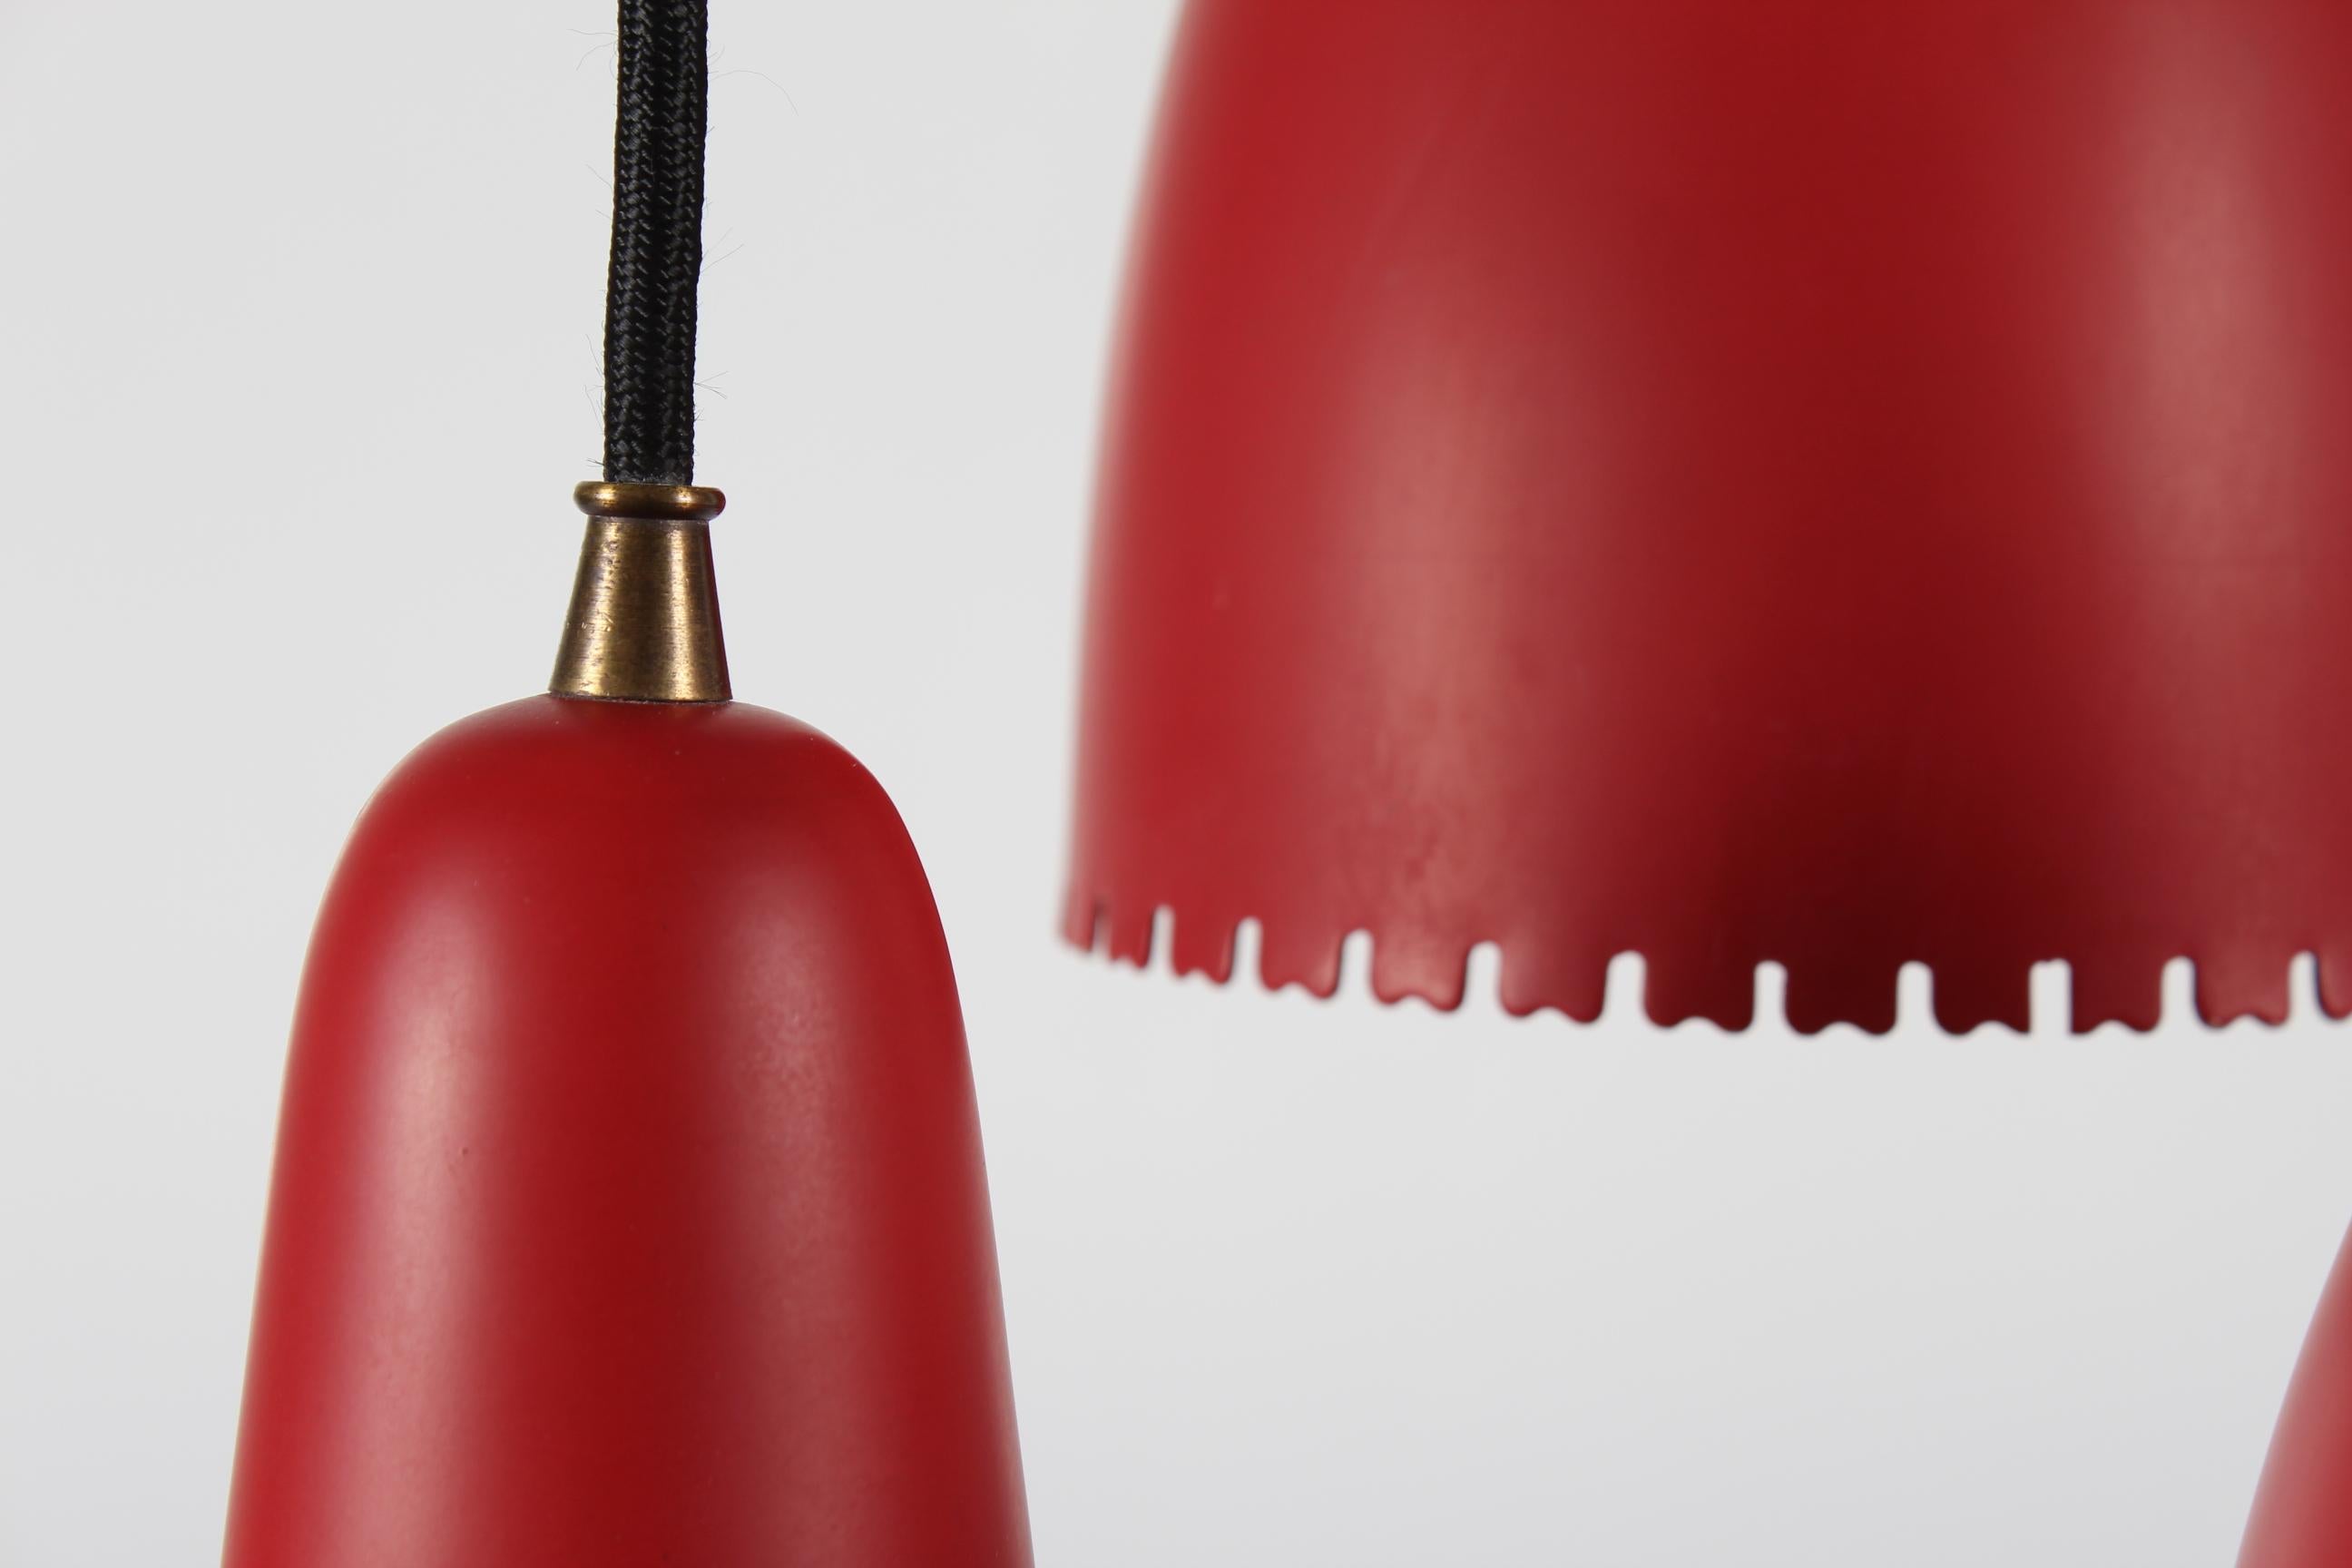 Danish Bent Karlby 3-Cone Chandelier with Red Lacquer Made by Lyfa in Denmarkk, 1950s For Sale